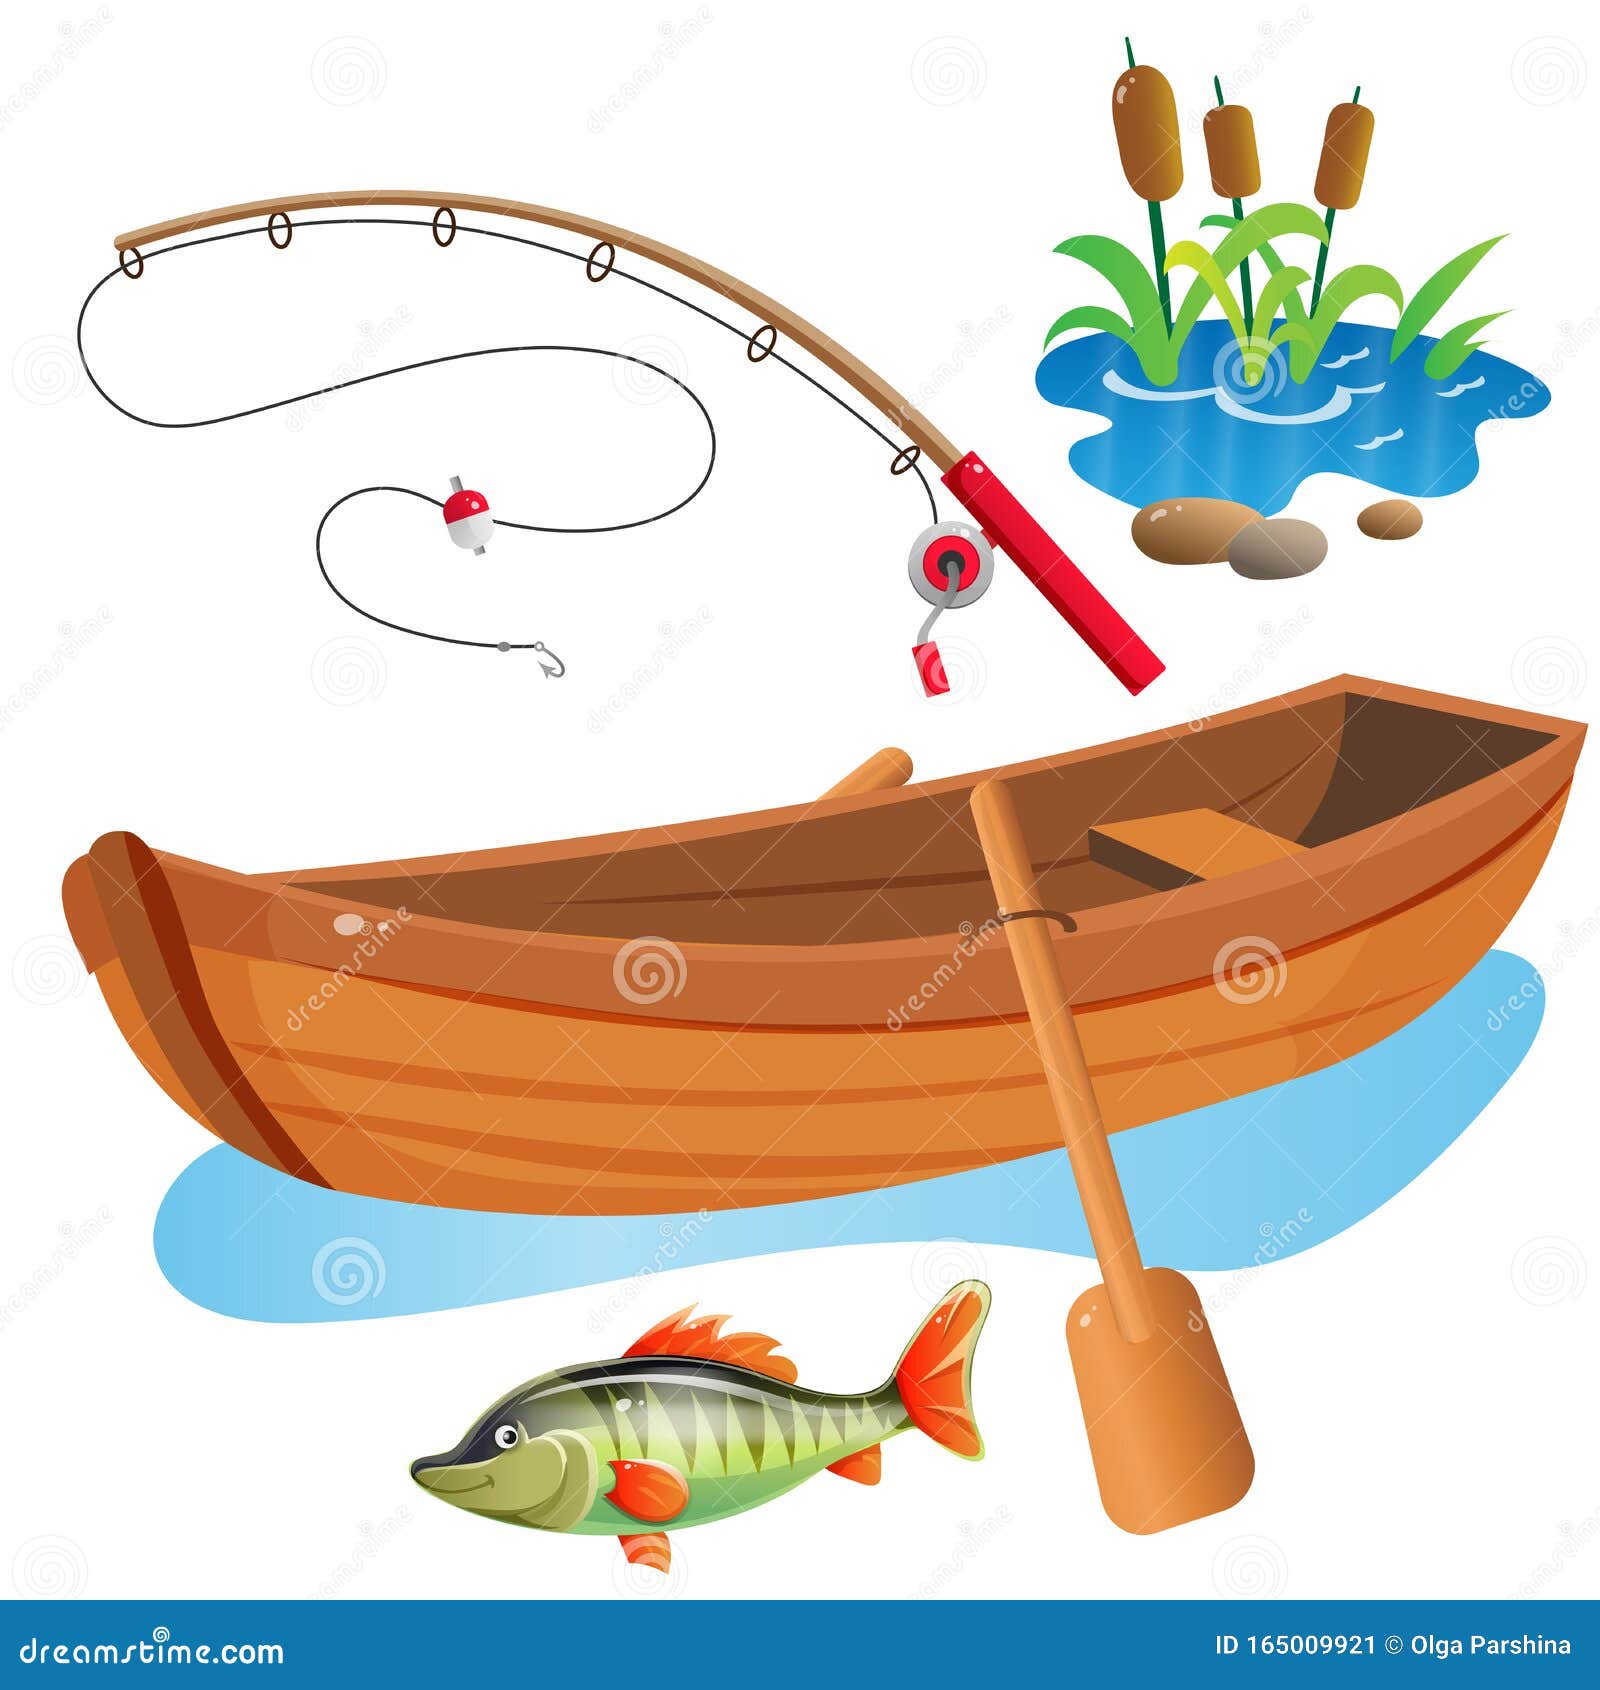 Color Images of Cartoon Boat with Paddles, Fishing Rod and Big